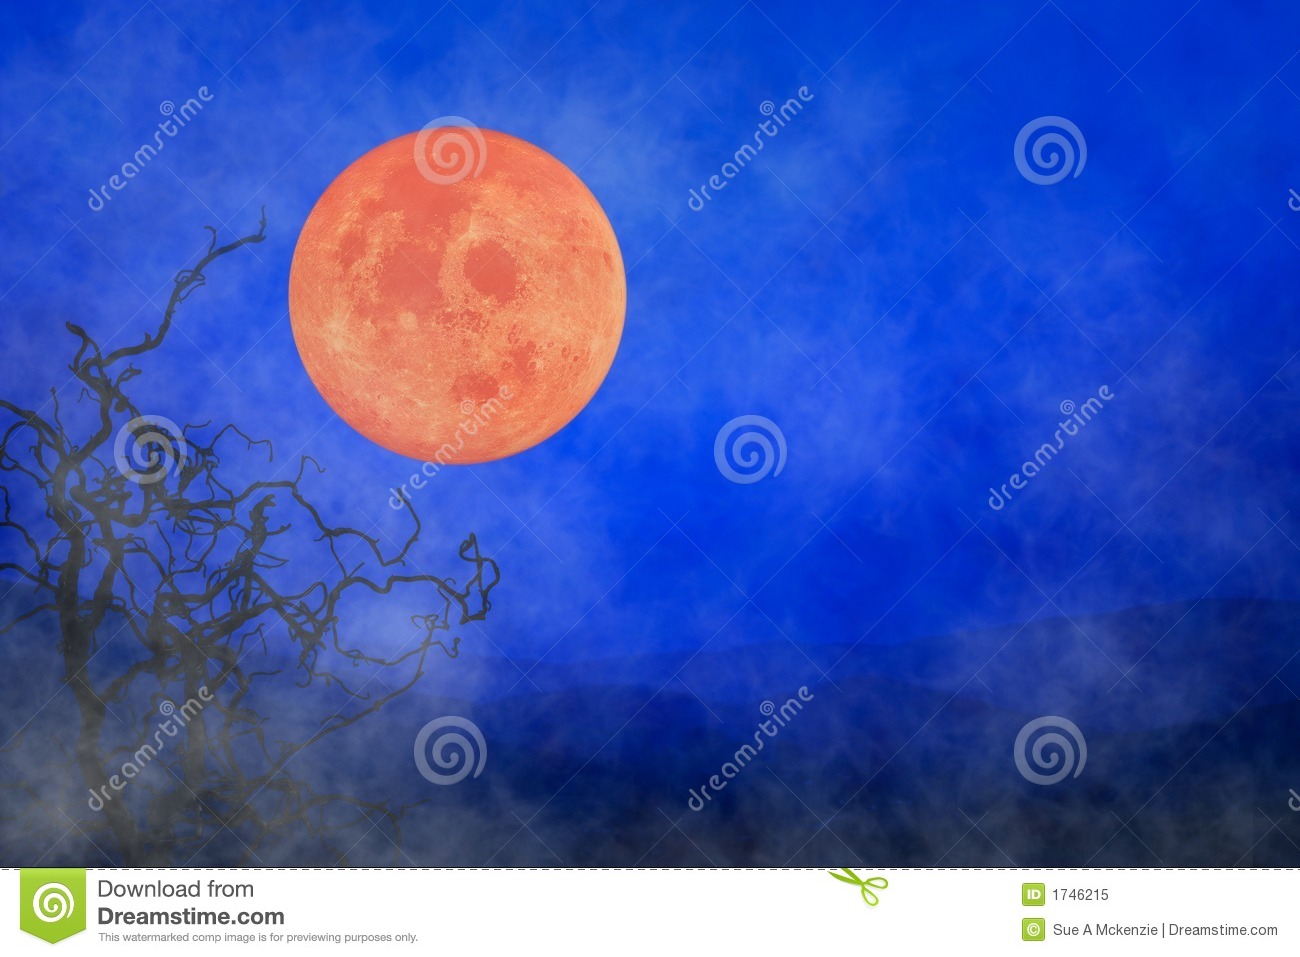 Halloween Background   Full Moon   Twisted Tree Branches Royalty Free